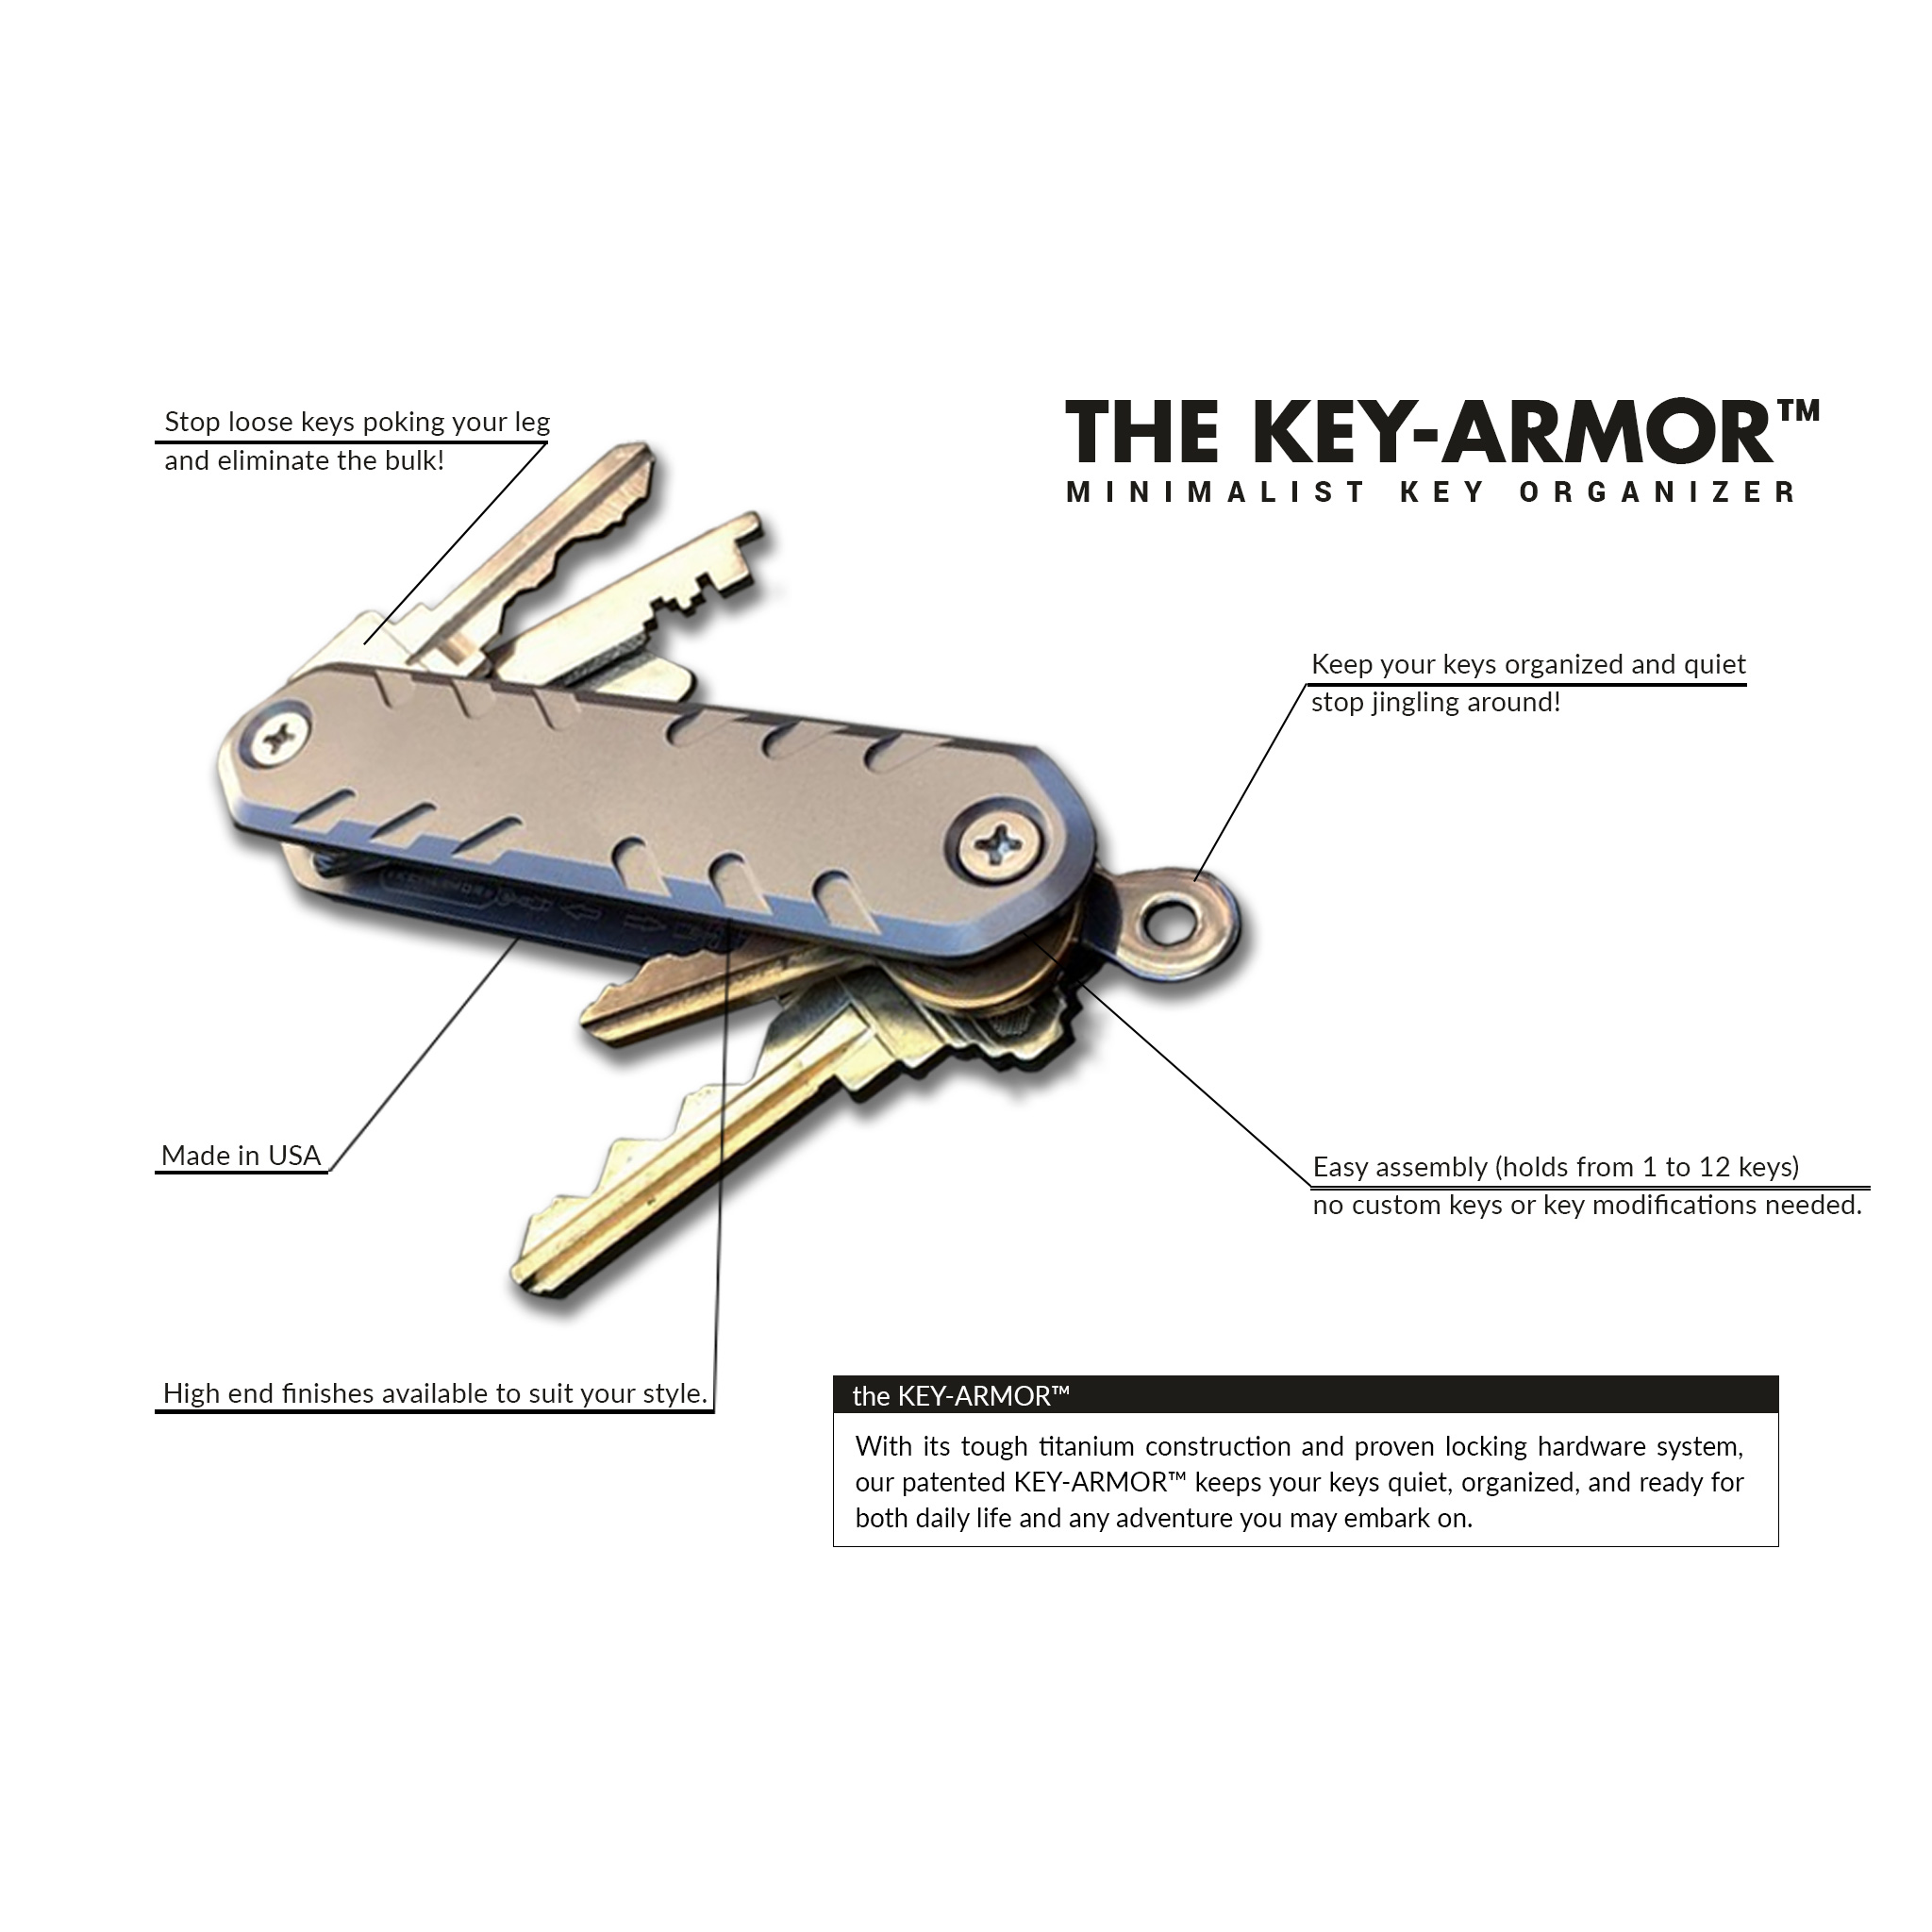 KEY-ARMOR features